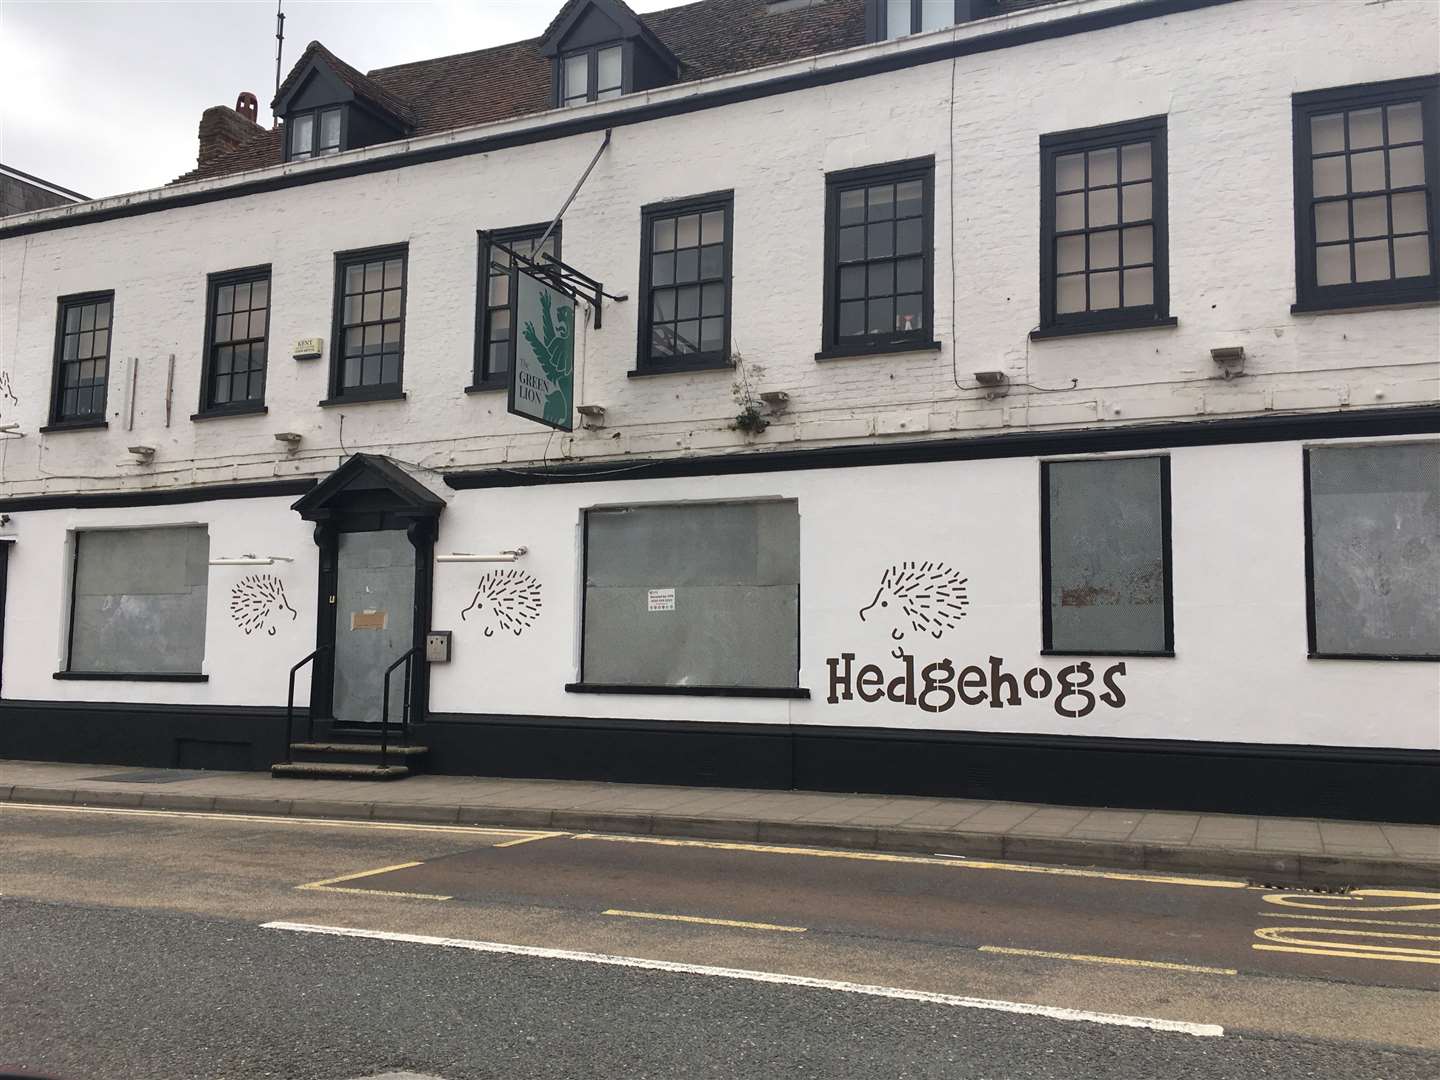 The Hedgehogs nursery had plans to move into the former Green Lion pub in Rainham